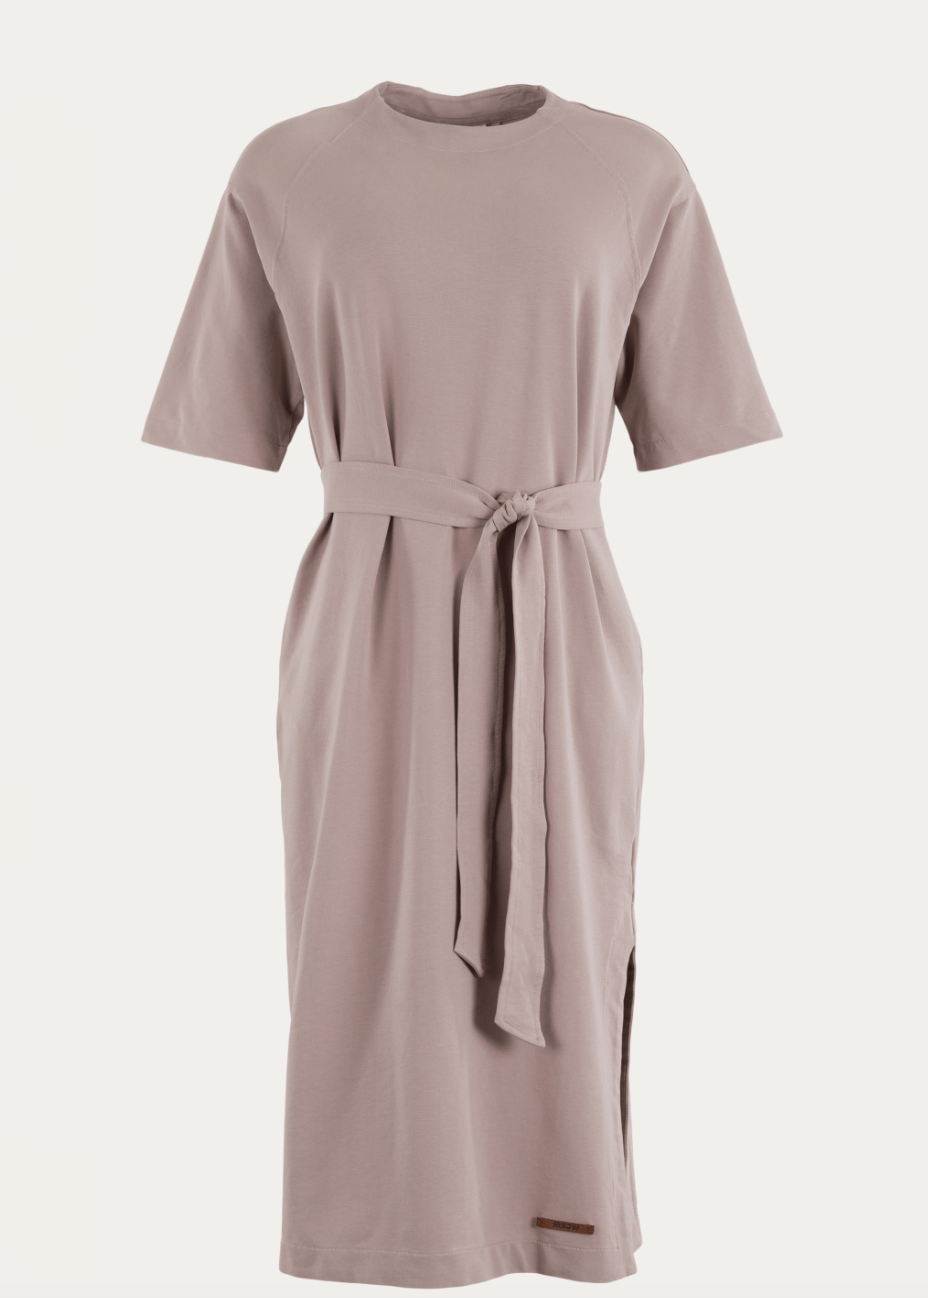 Sweatdress Miche, Taupe Solid MSCW